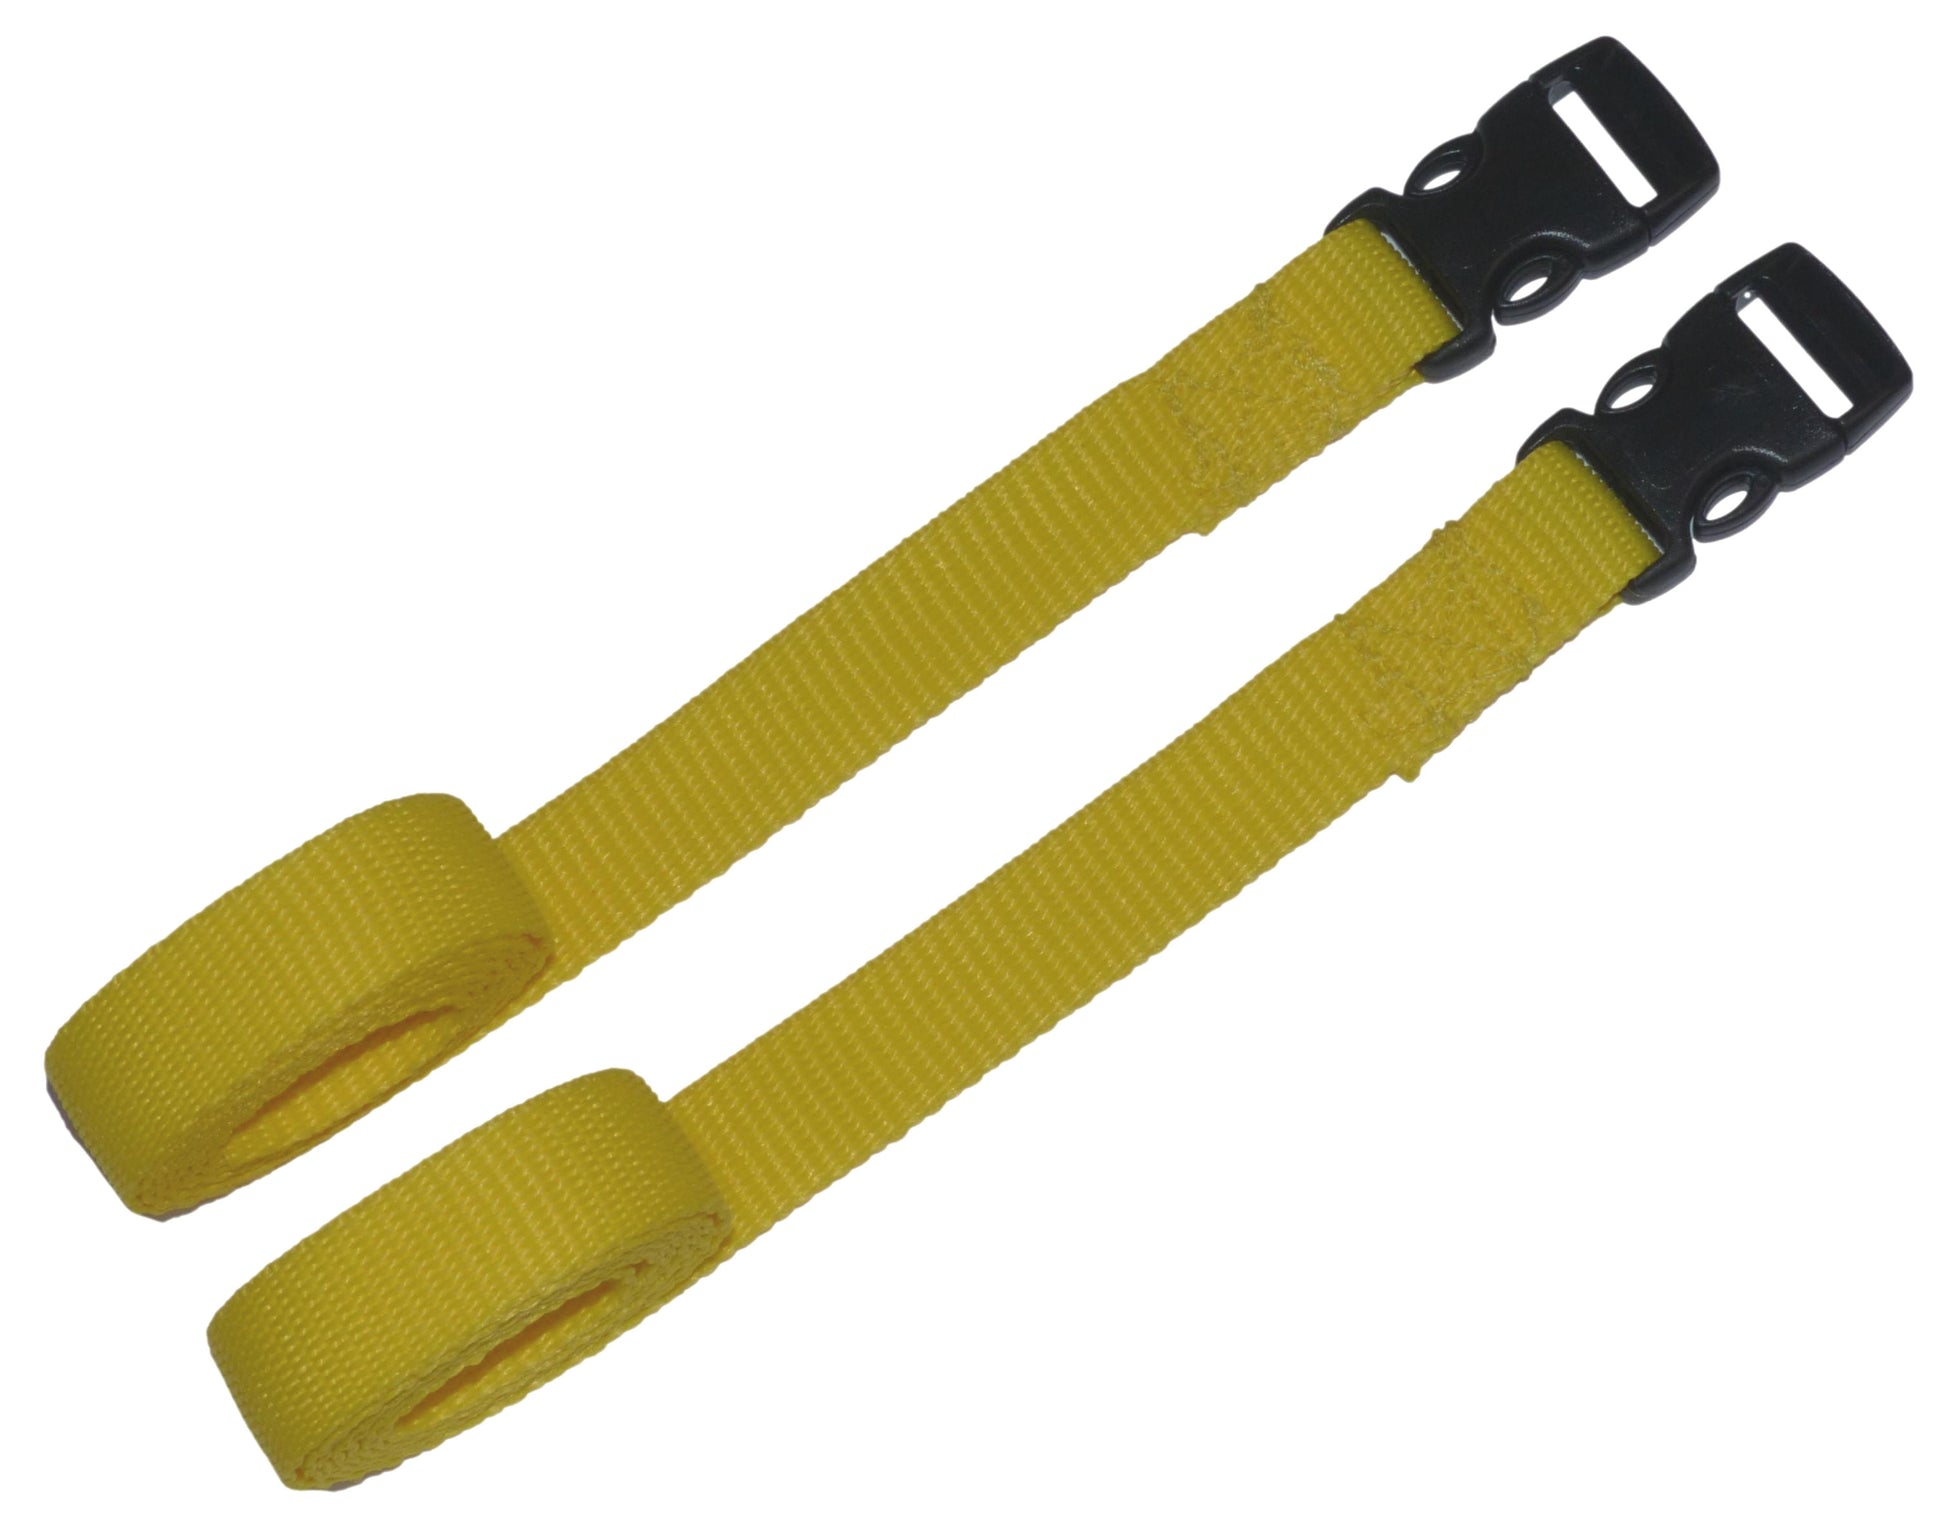 Benristraps 19mm Webbing Strap with Quick Release Buckle (Pair) in yellow (2)